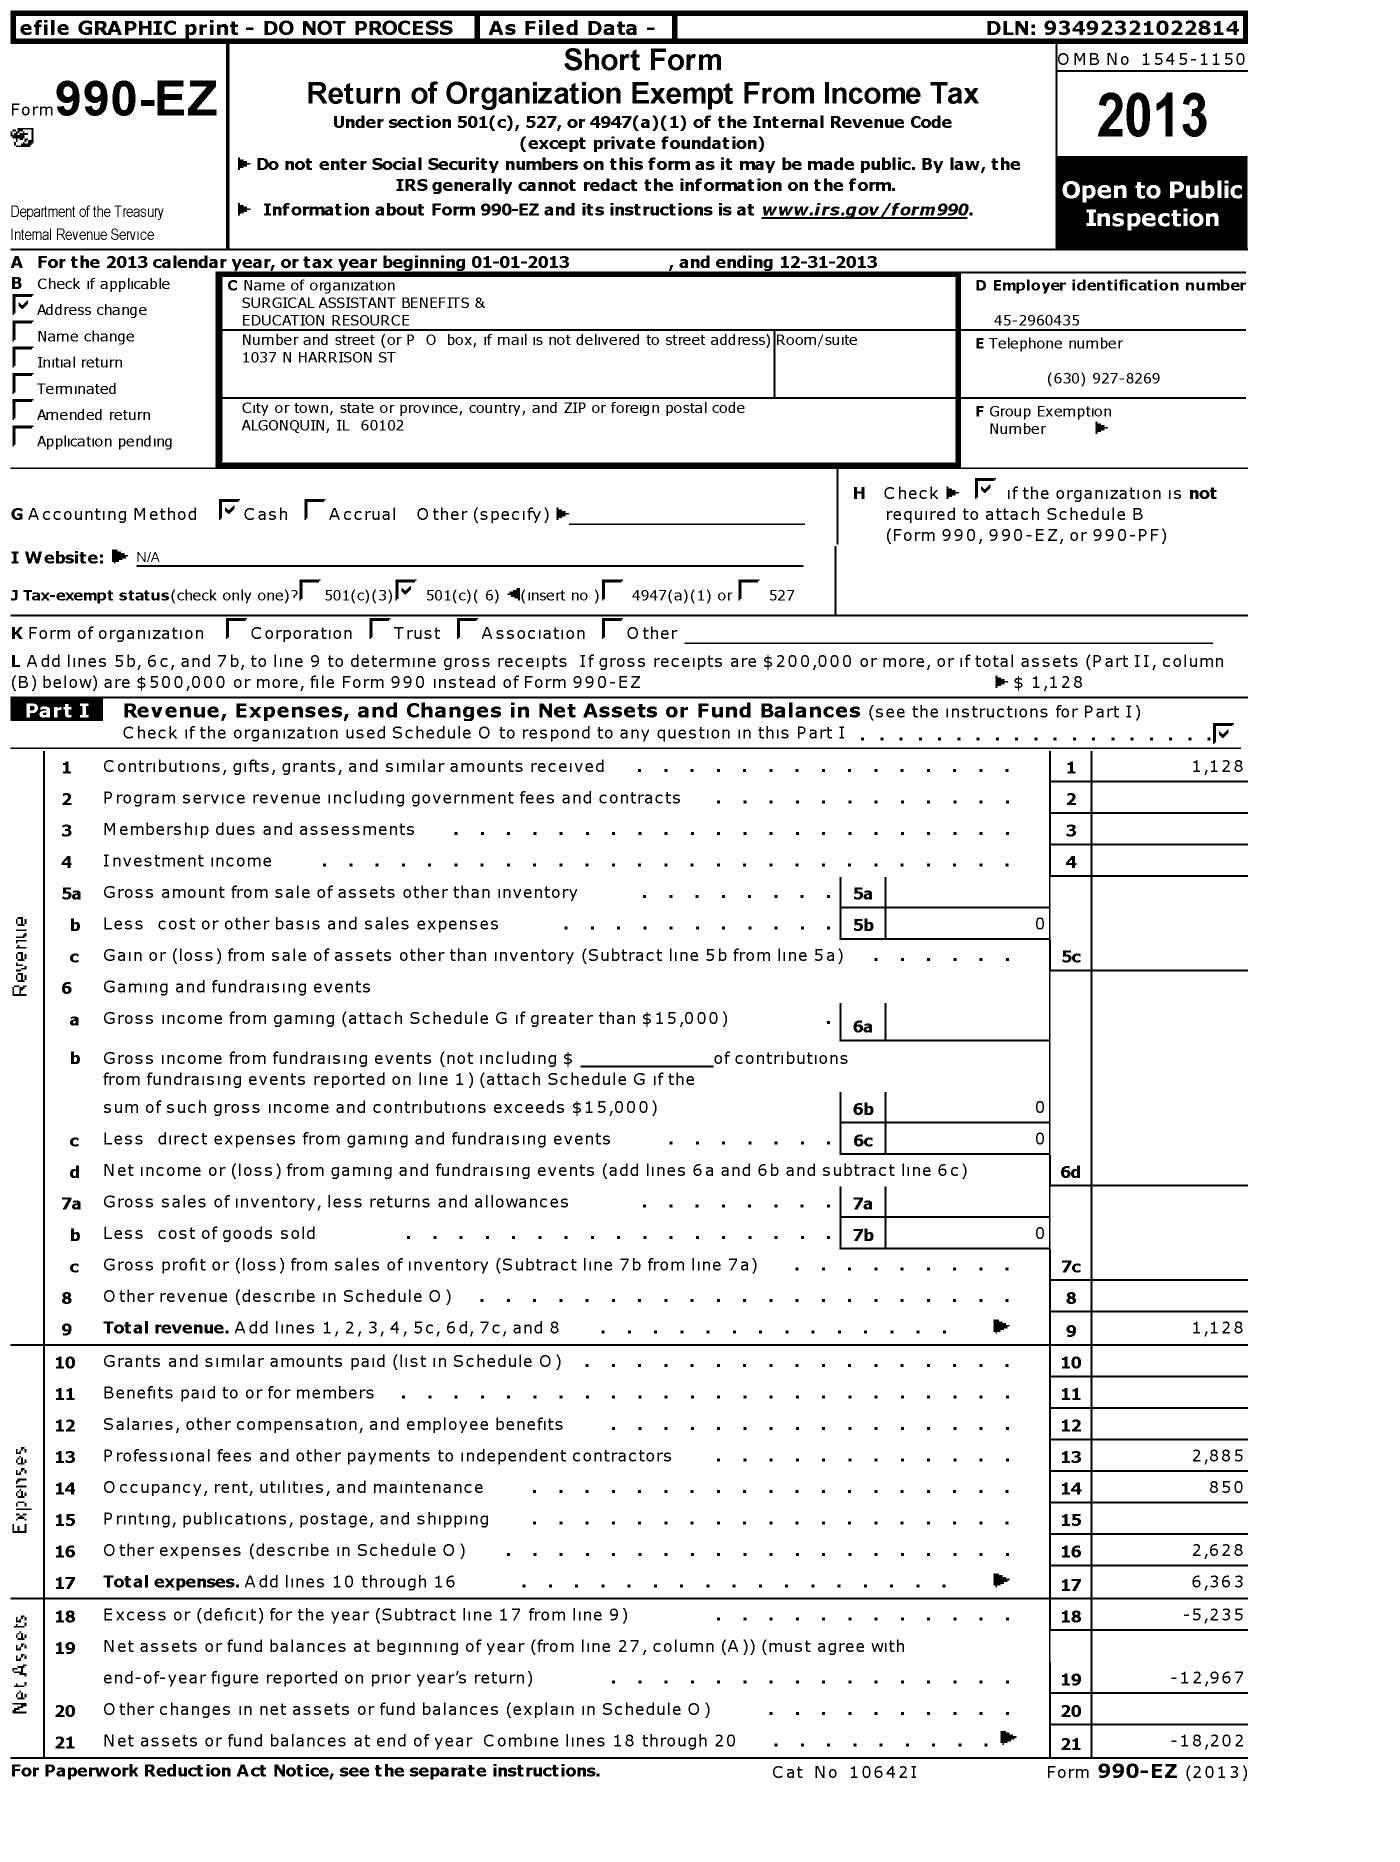 Image of first page of 2013 Form 990EO for Surgical Assistants Benefits and Education Resource